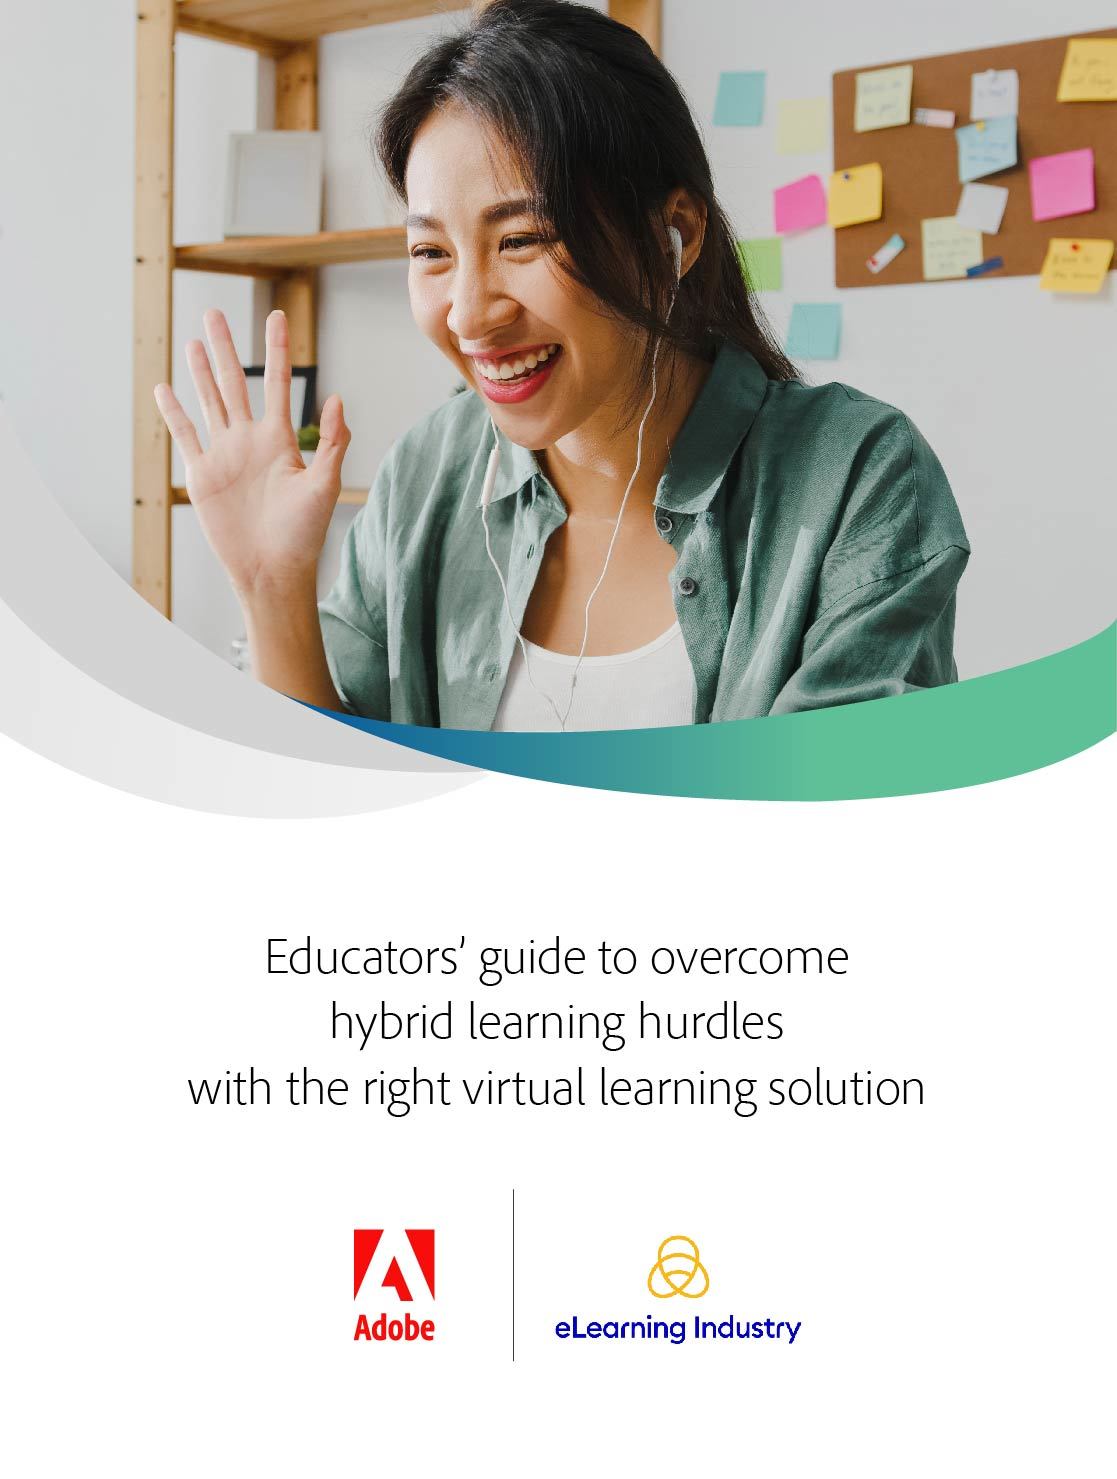 eBook Release: Educators’ Guide To Overcome Hybrid Learning Hurdles With The Right Virtual Learning Solution